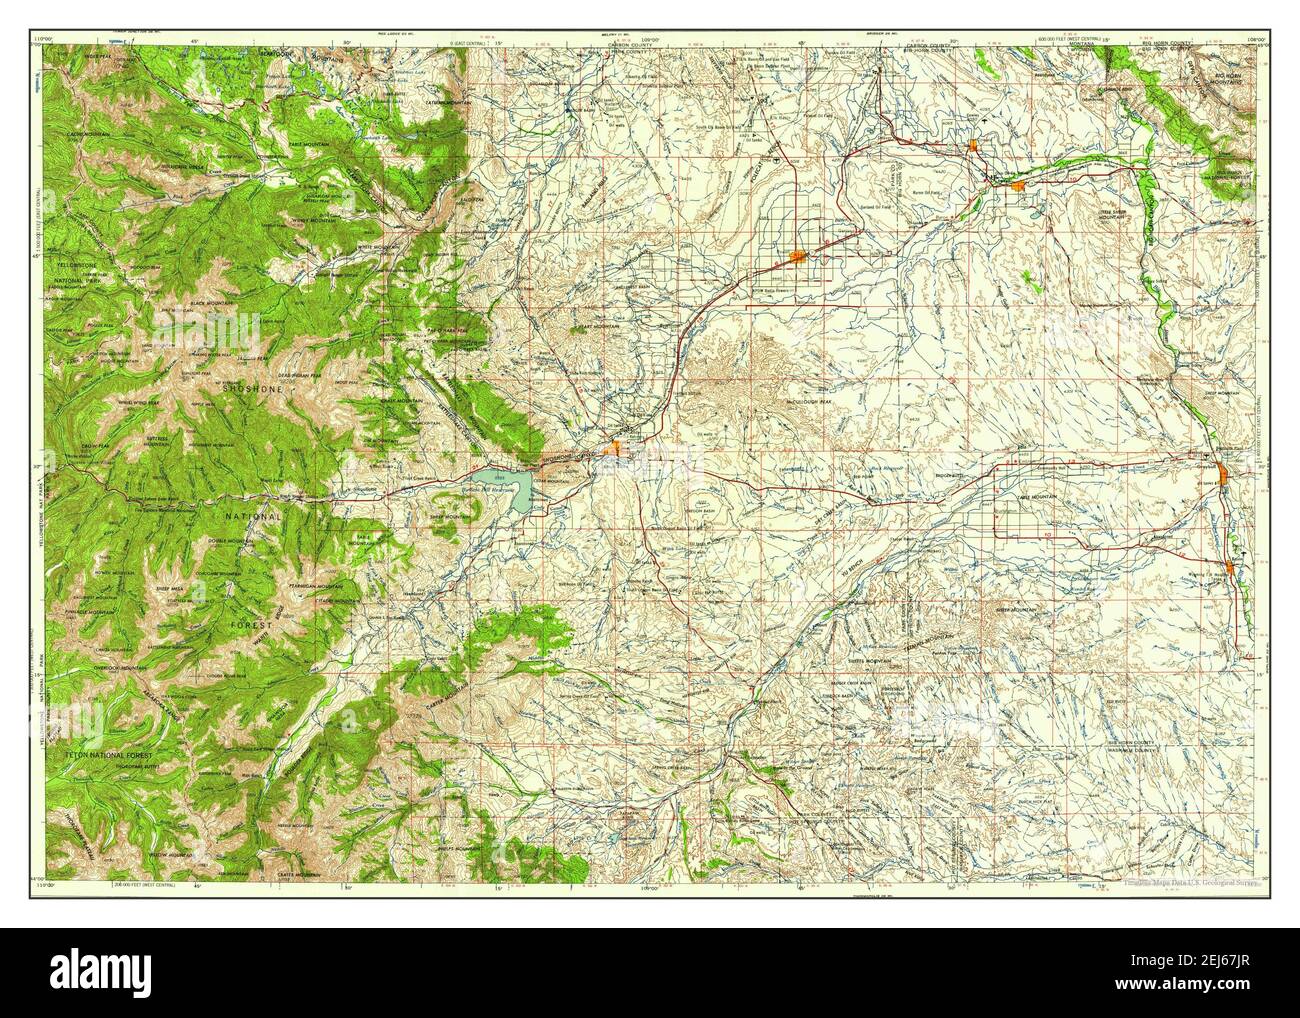 Cody, Wyoming, map 1958, 1:250000, United States of America by Timeless Maps, data U.S. Geological Survey Stock Photo